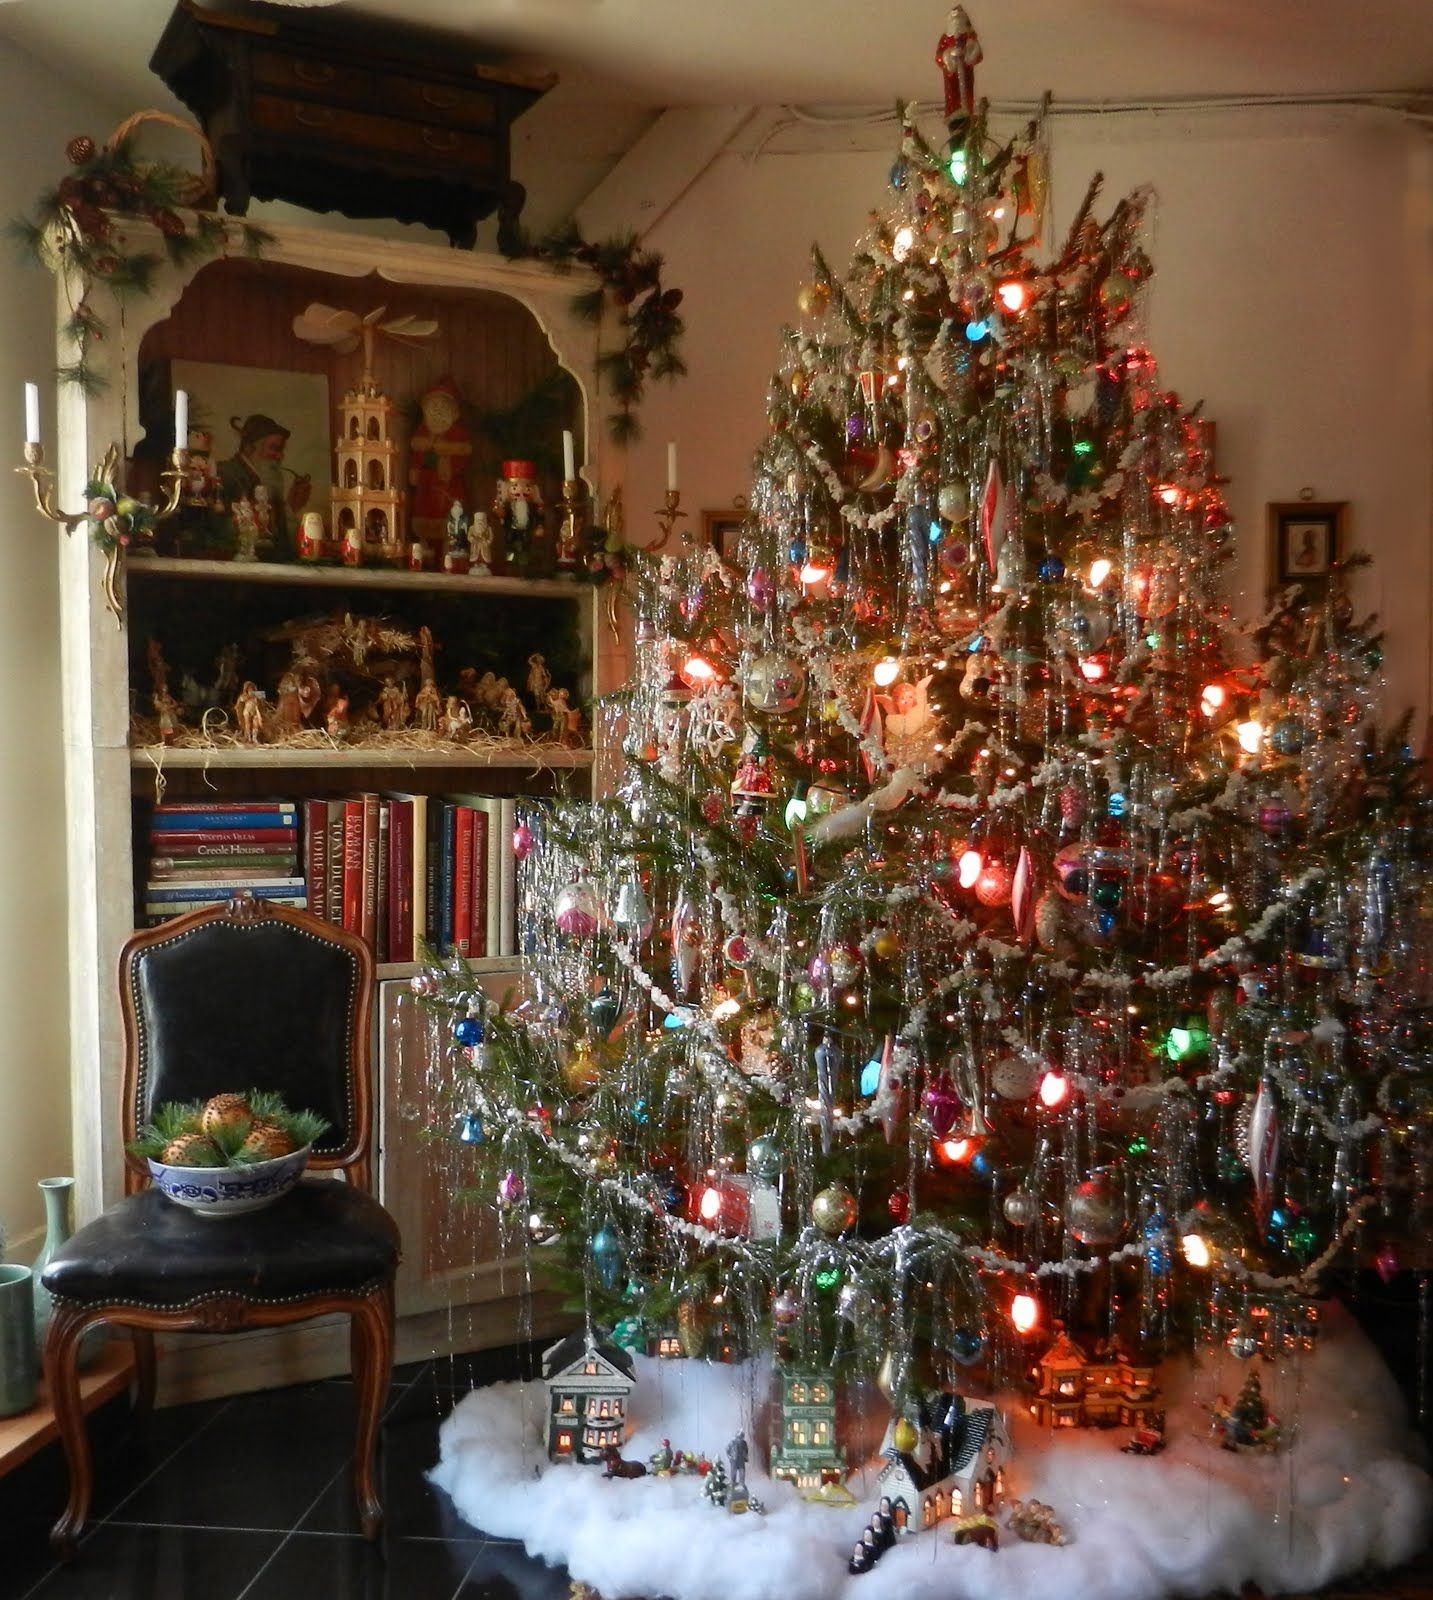 How to choose and decorate your Vintage Christmas Tree?